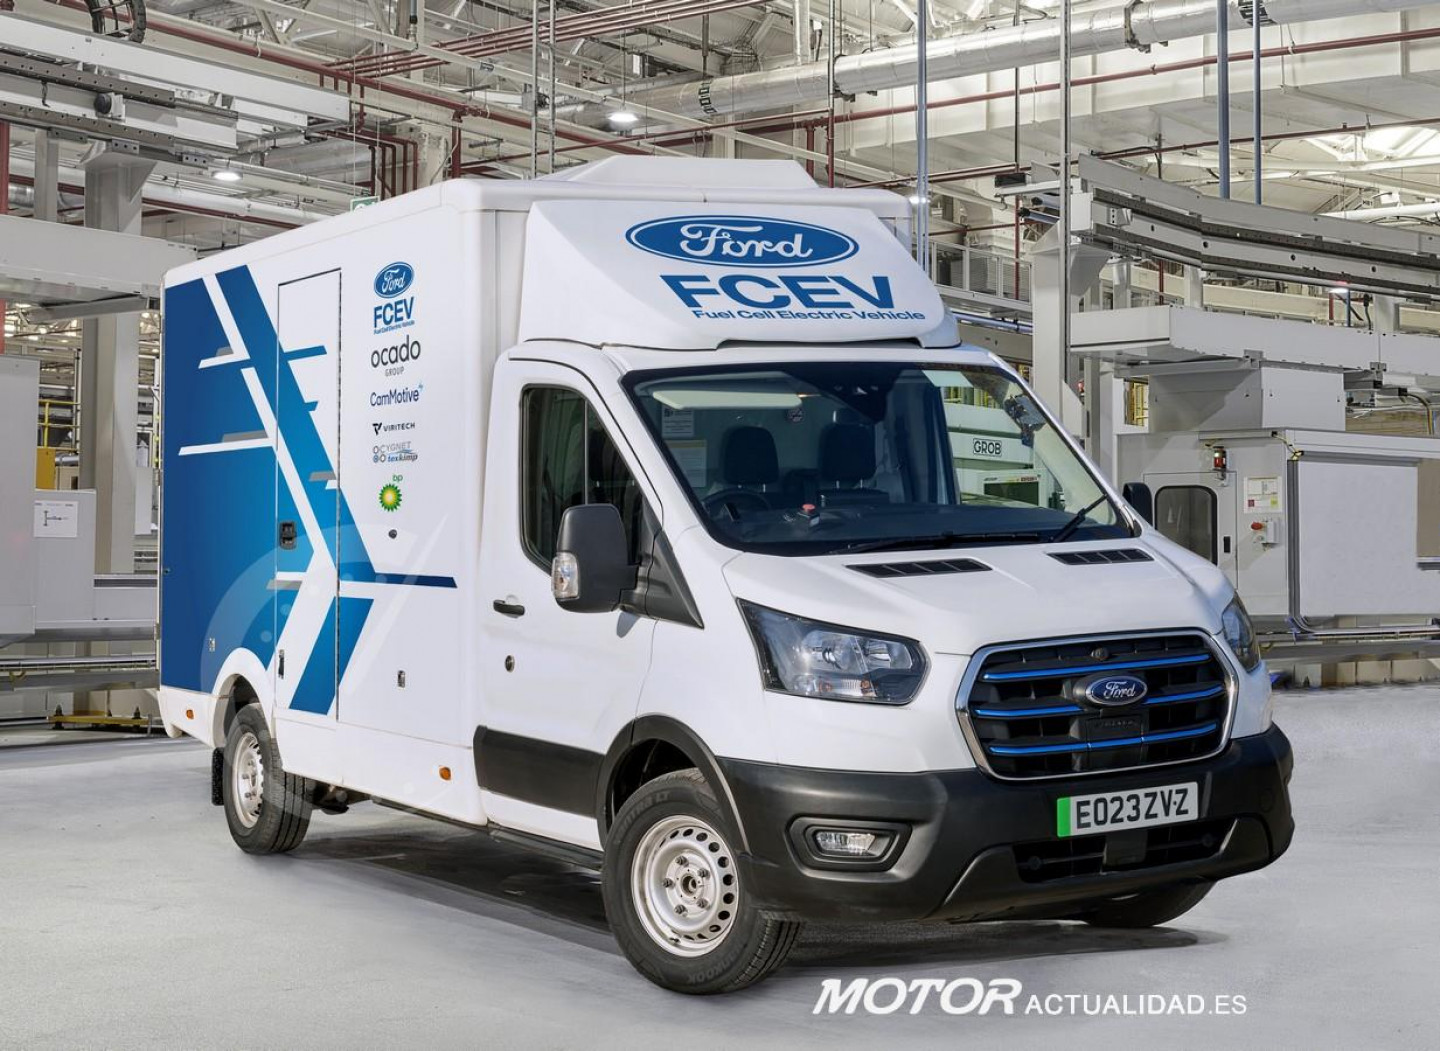 Ford_E-Transit_hydrogen_trial_front